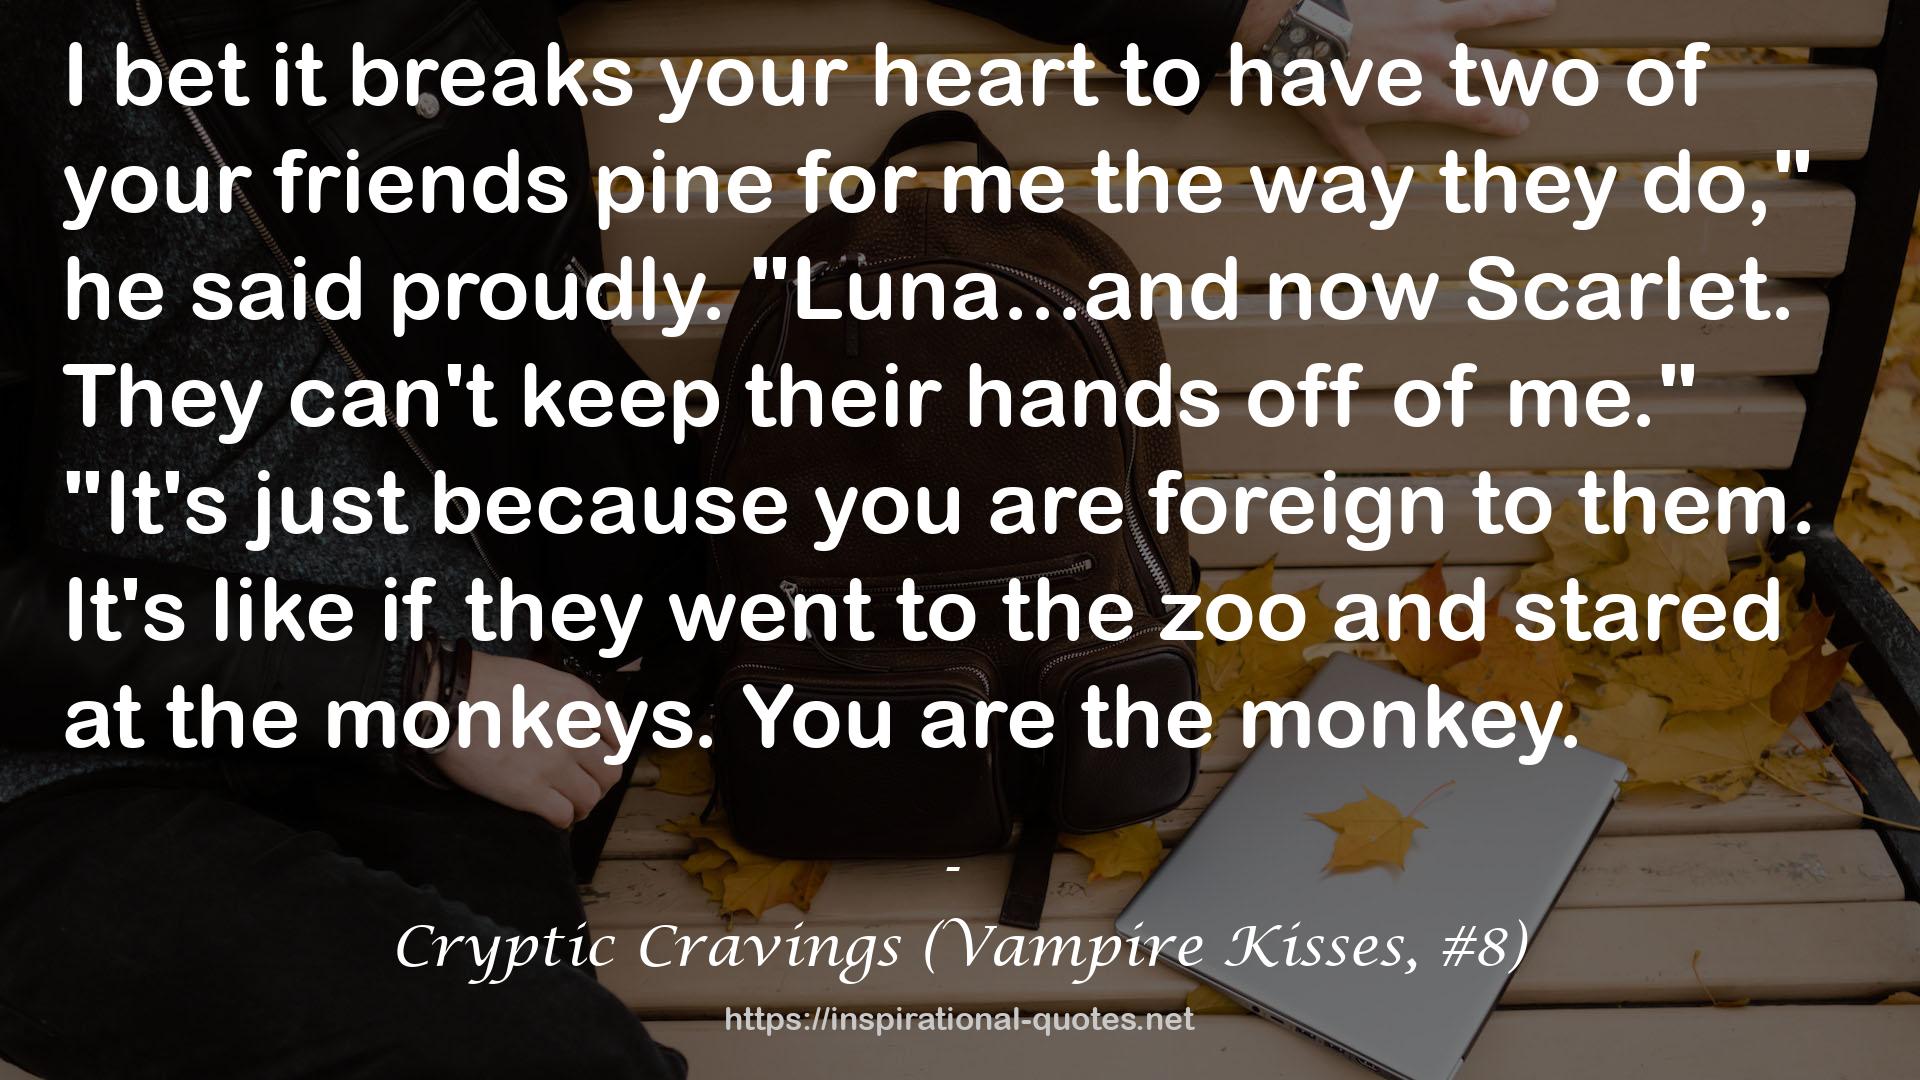 Cryptic Cravings (Vampire Kisses, #8) QUOTES